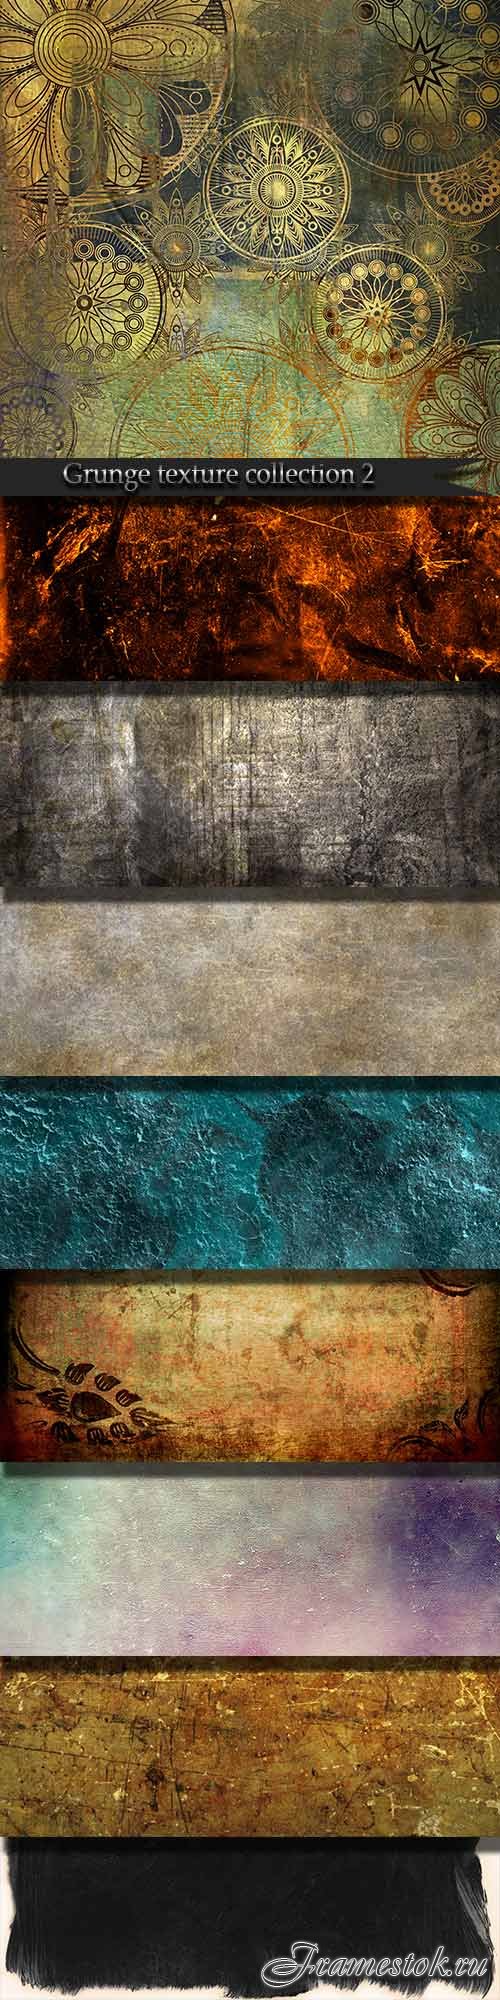 Grunge texture collection 2